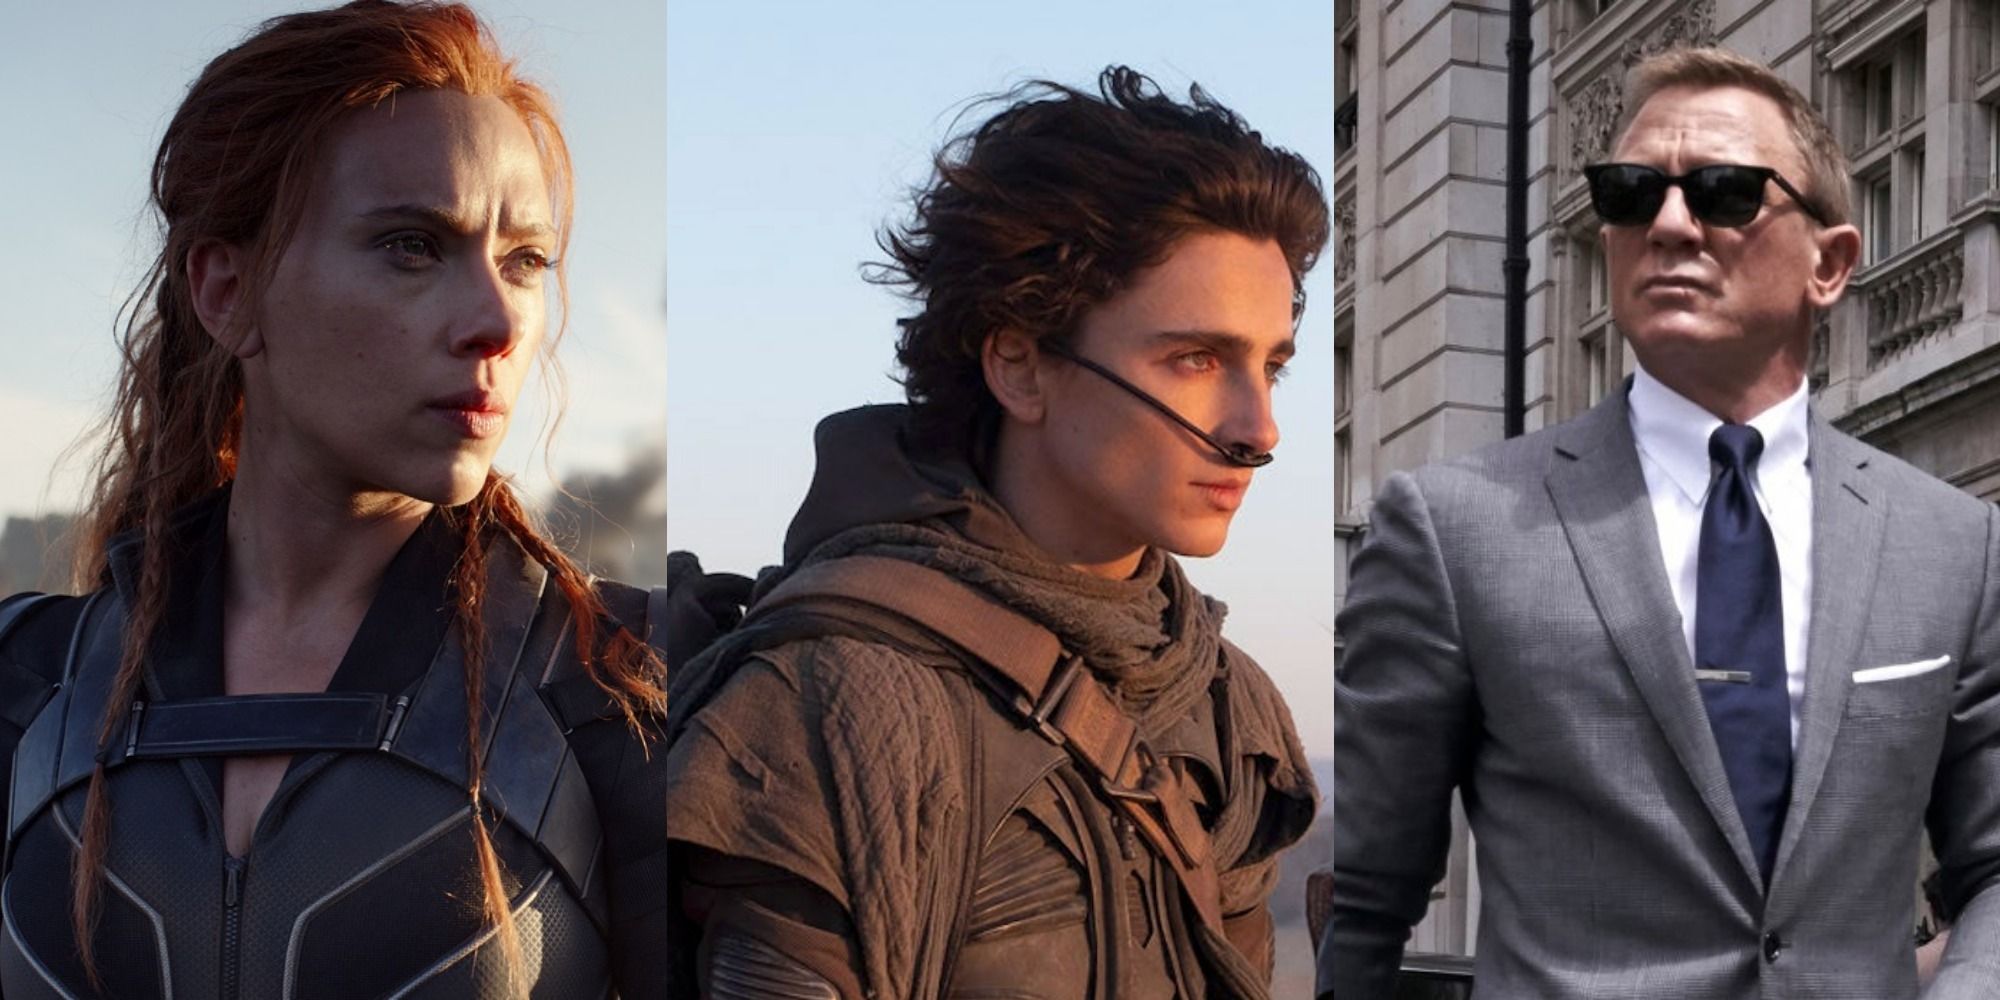 Every Movie Confirmed For 2021 (So Far)